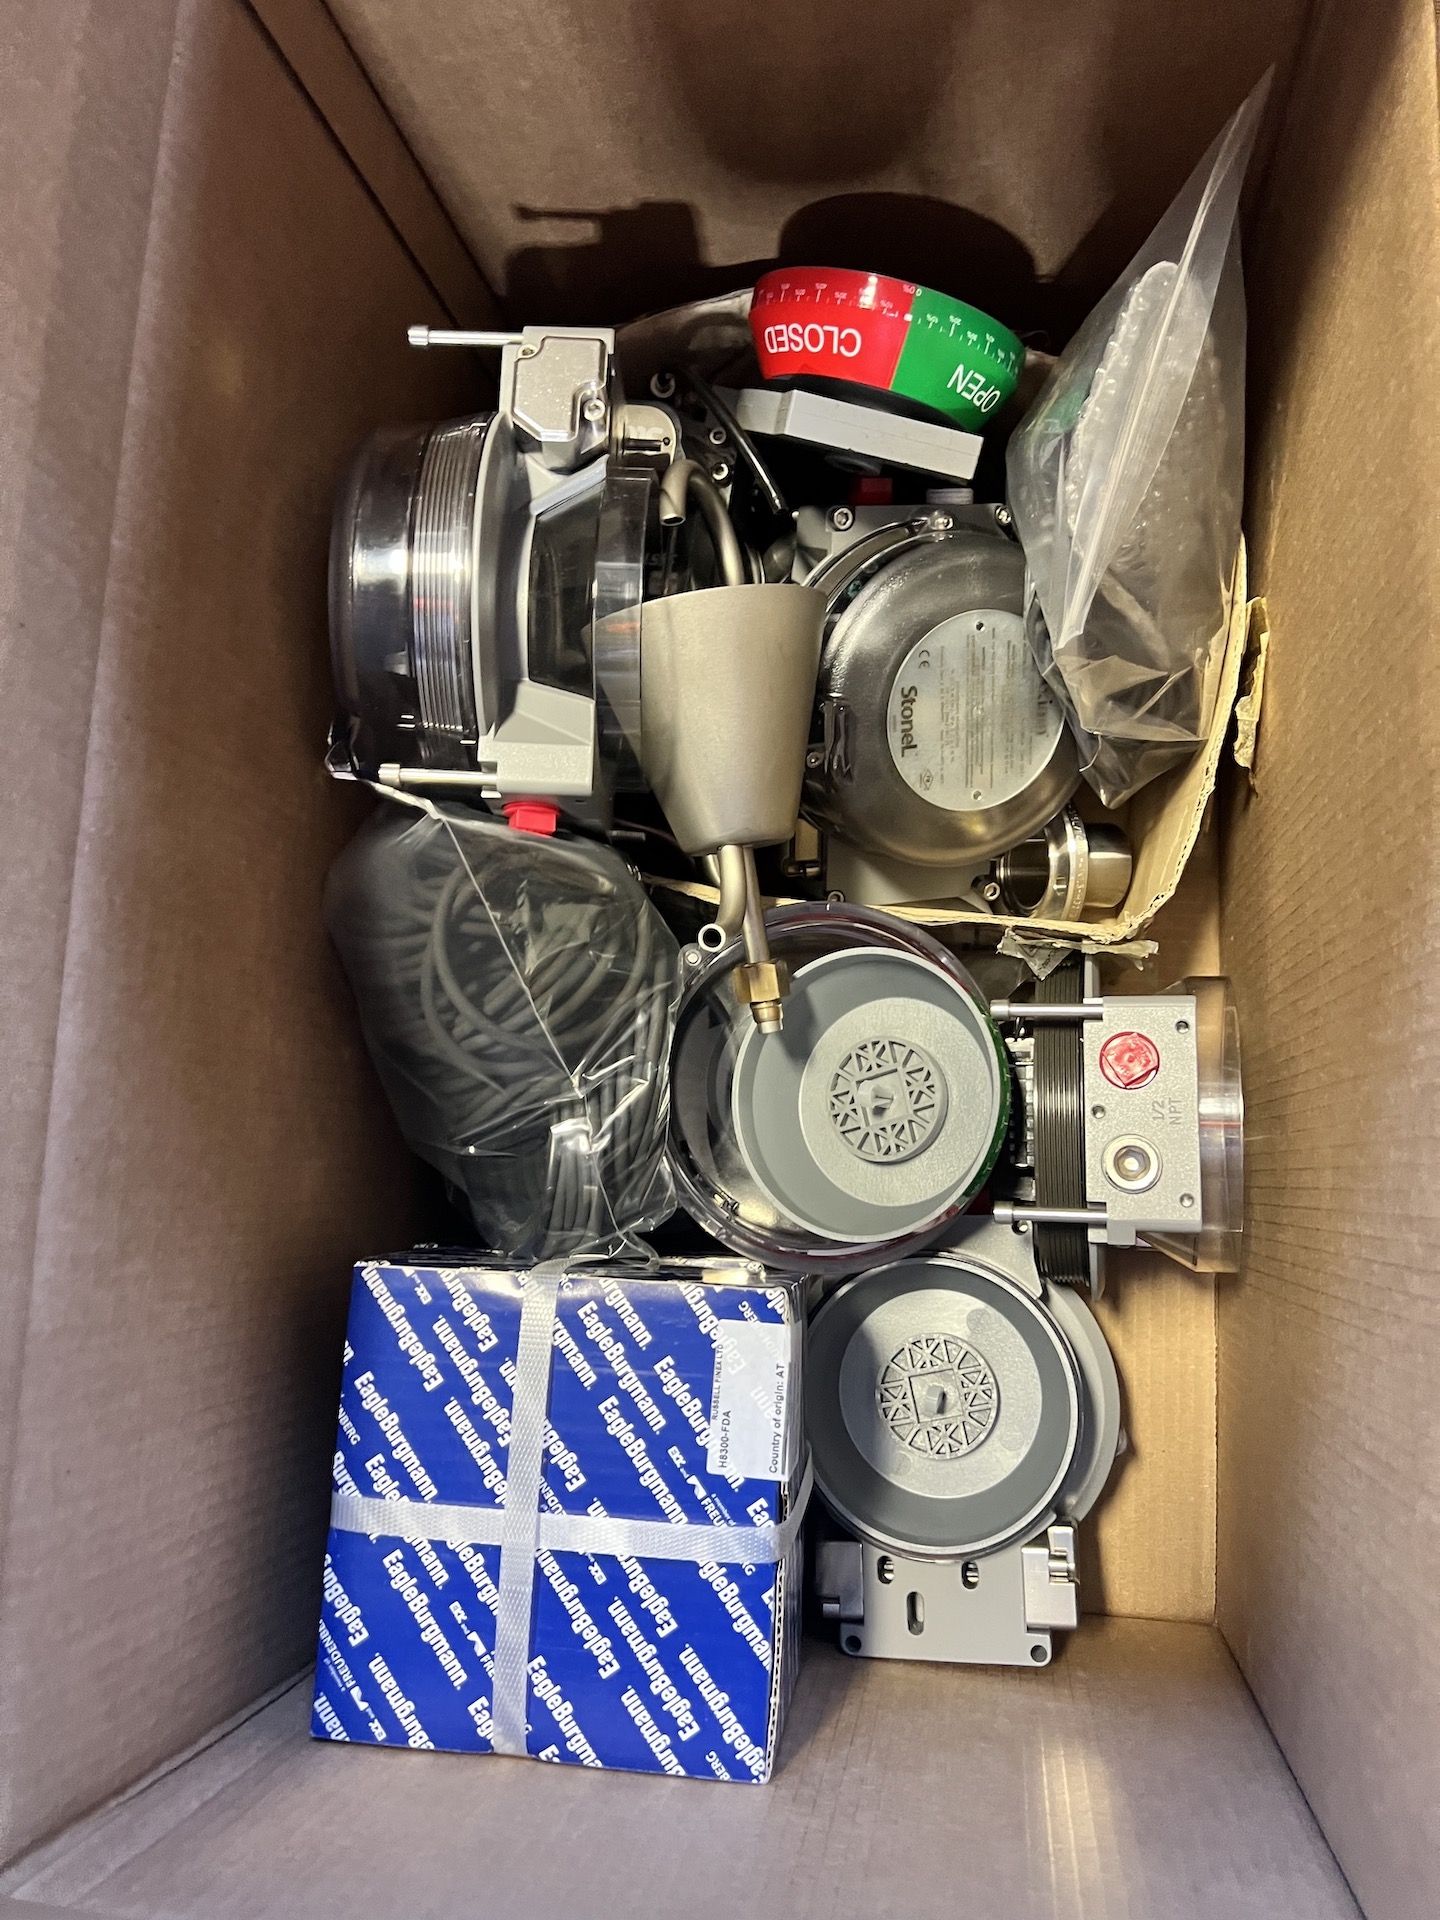 ASSORTED MRO AND SPARE PARTS, PLEASE SEE INVENTORY LISTS IN PHOTOS - Image 2 of 6